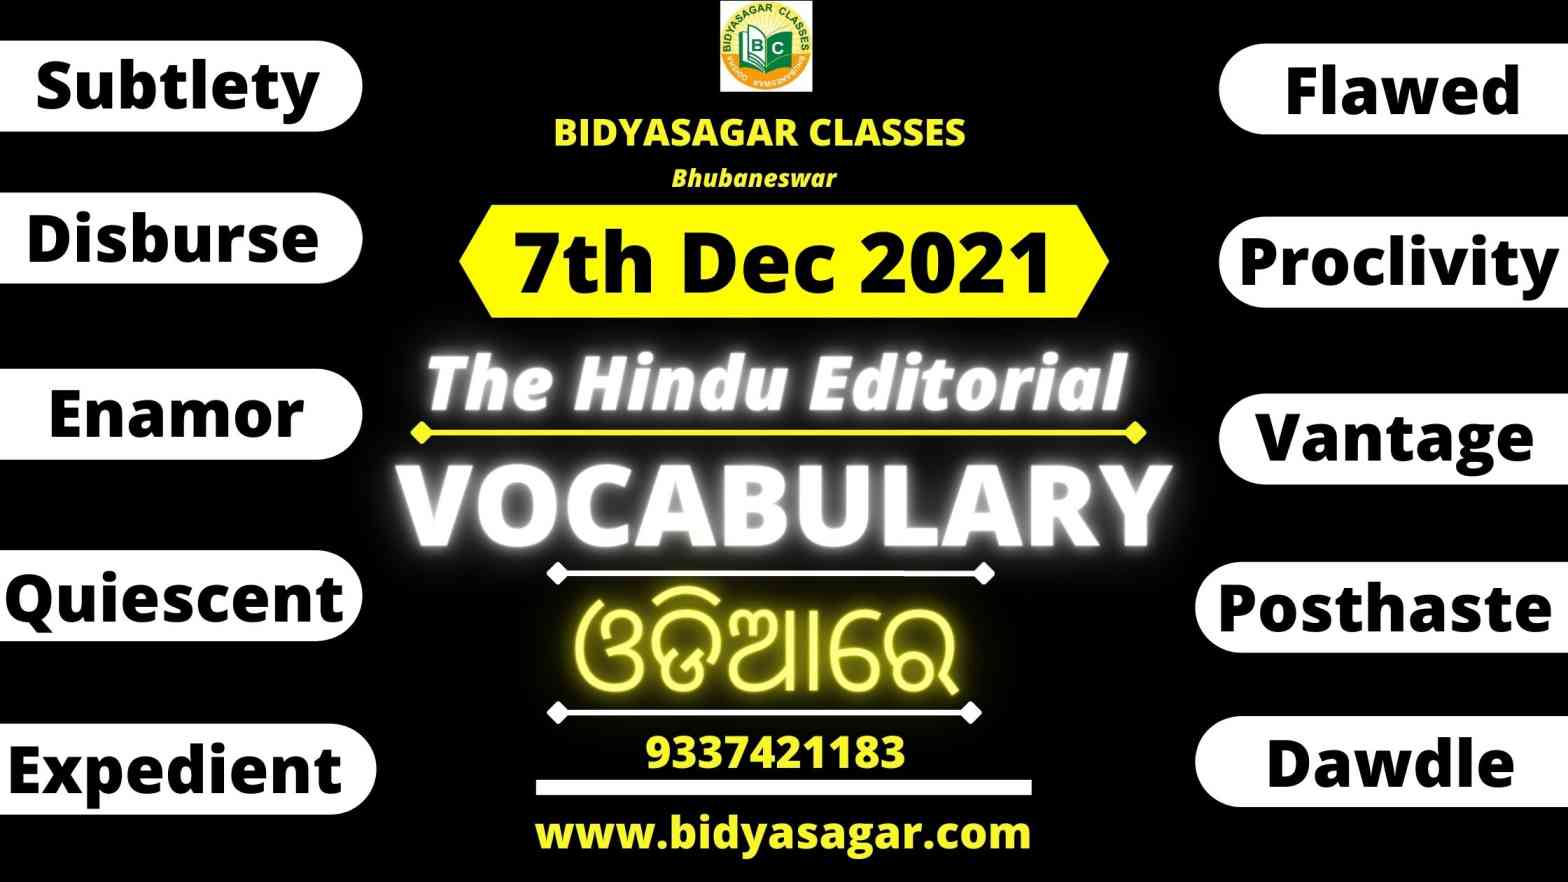 The Hindu Editorial Vocabulary of 7th December 2021